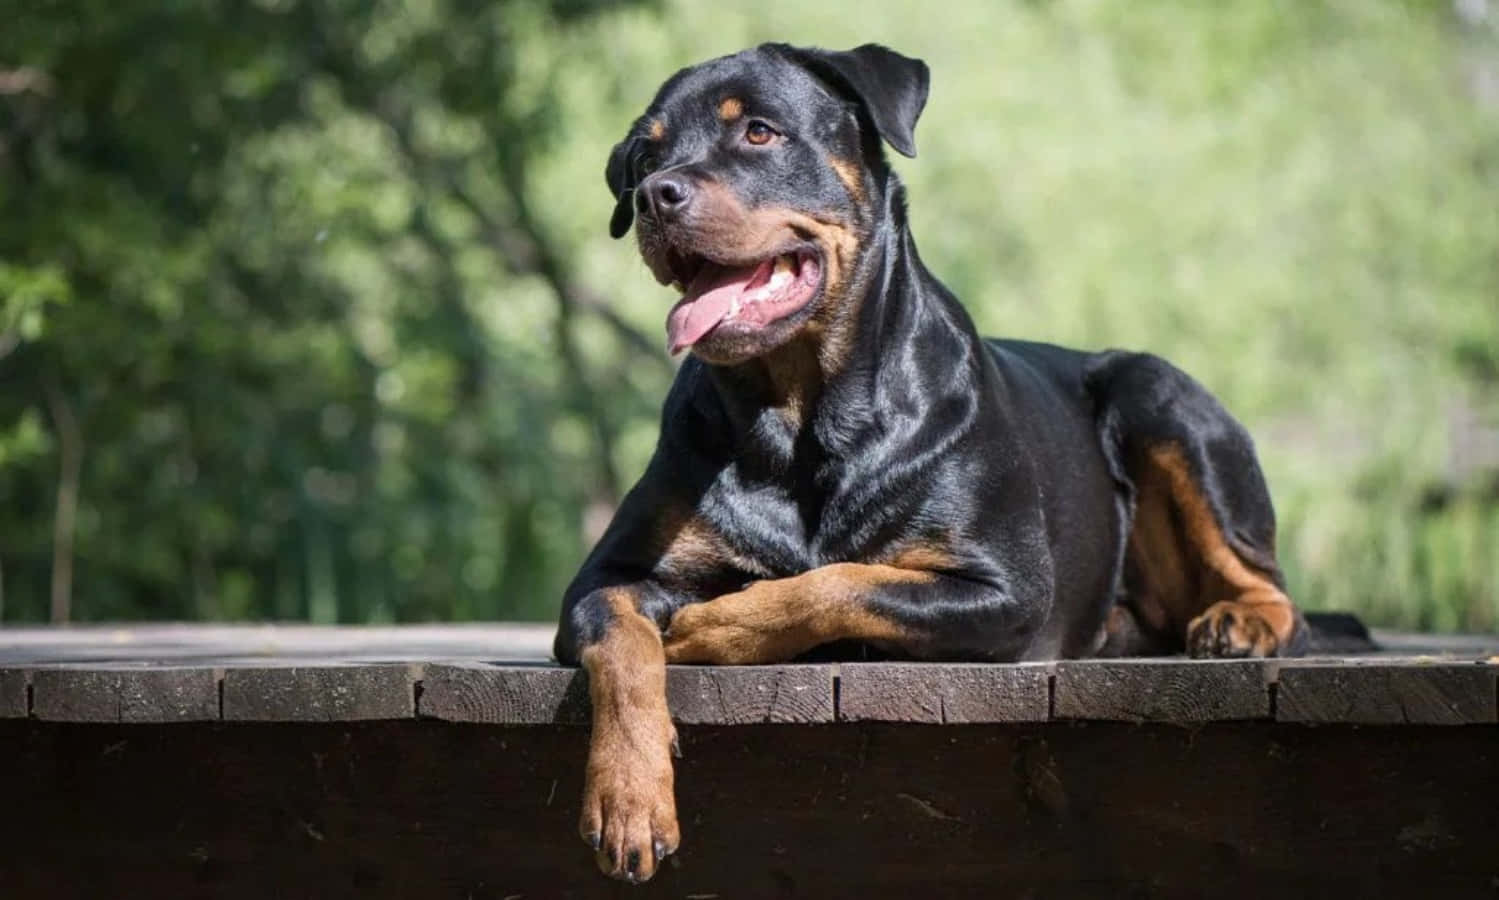 A Rottweiler Dog Is Laying On A Wooden Bench